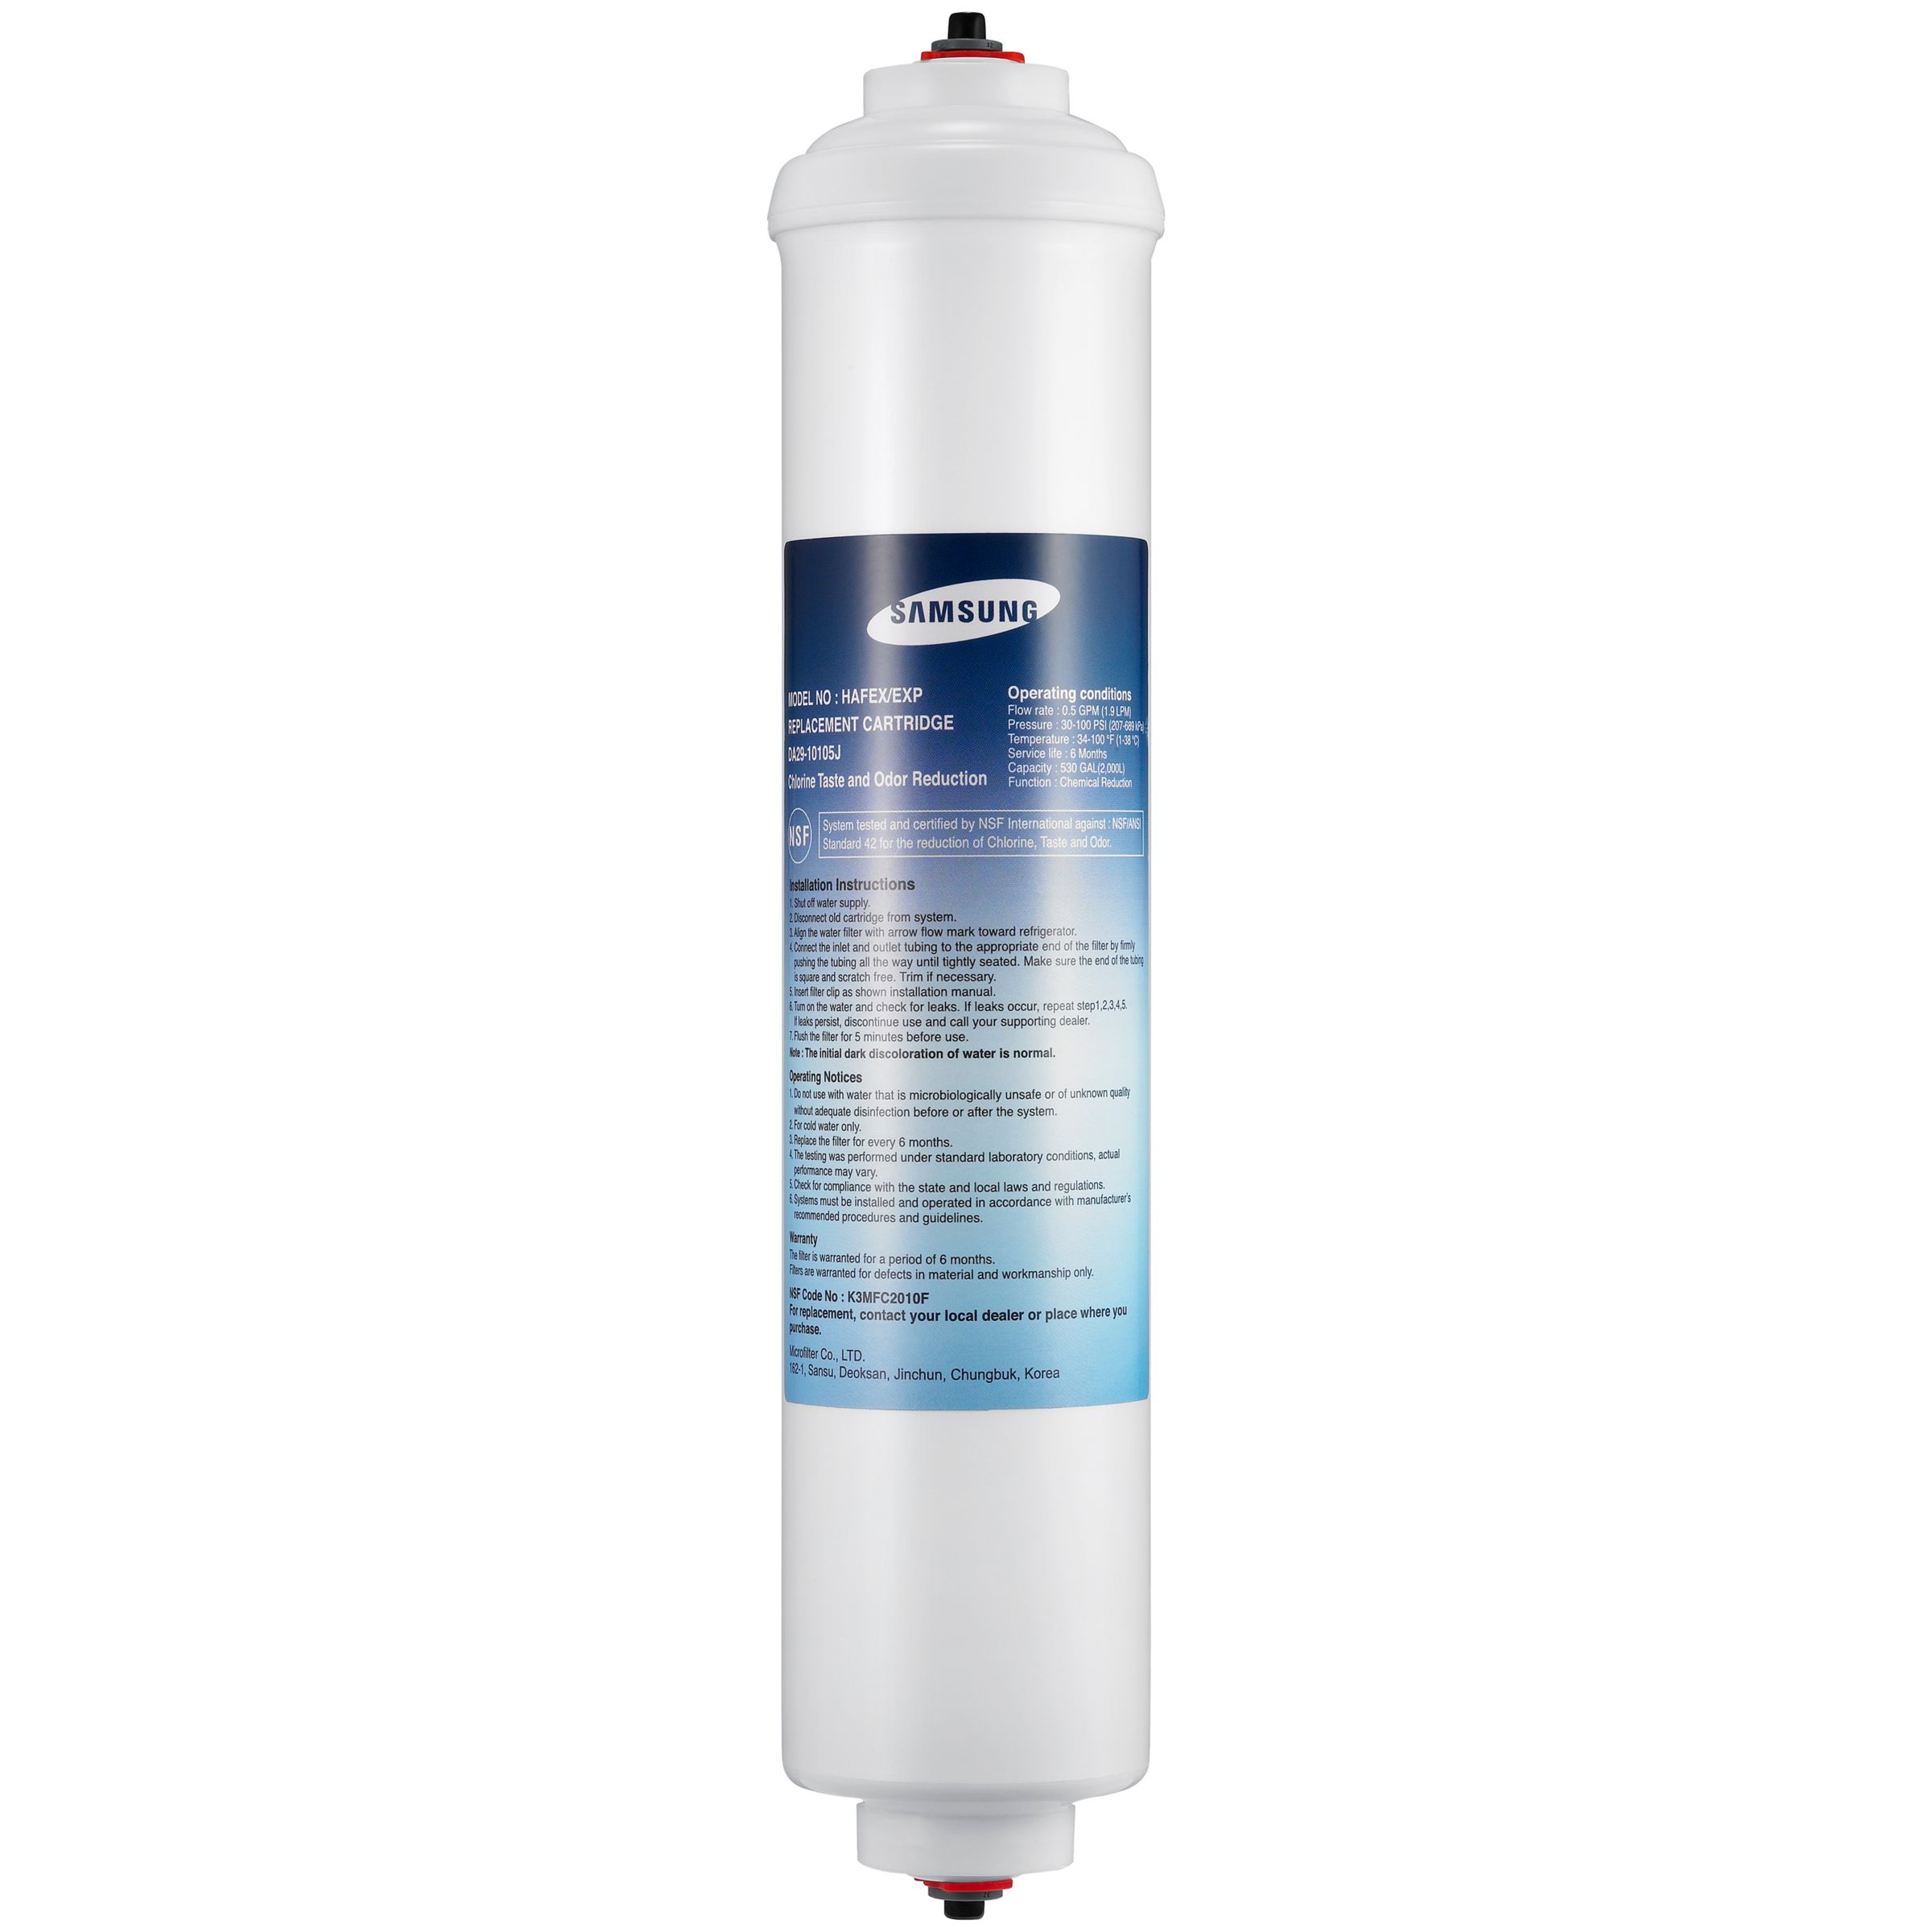 Samsung HAFEX/EXP External Water Filter for American Style Fridge Freezers